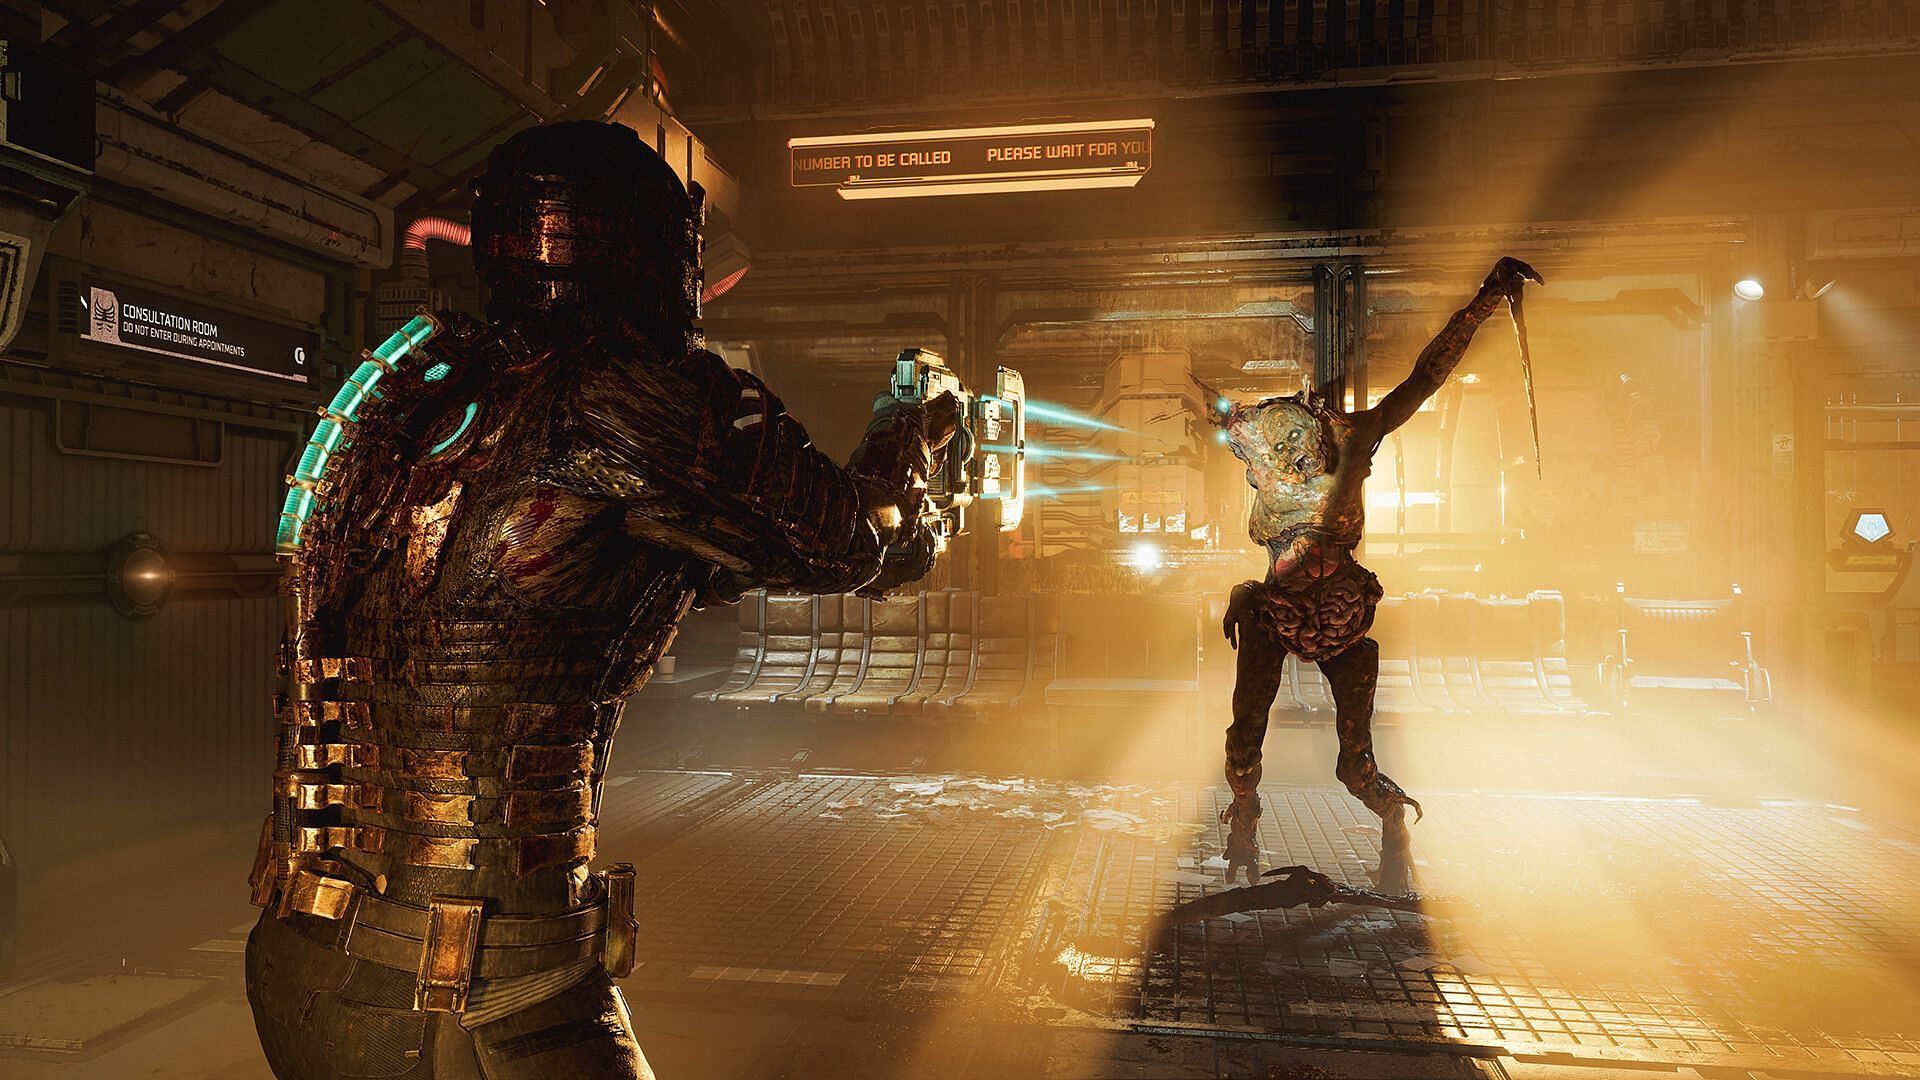 Dead Space offers an even more immersive experience with its enhanced ray-traced visuals (Image via Electronics Arts)